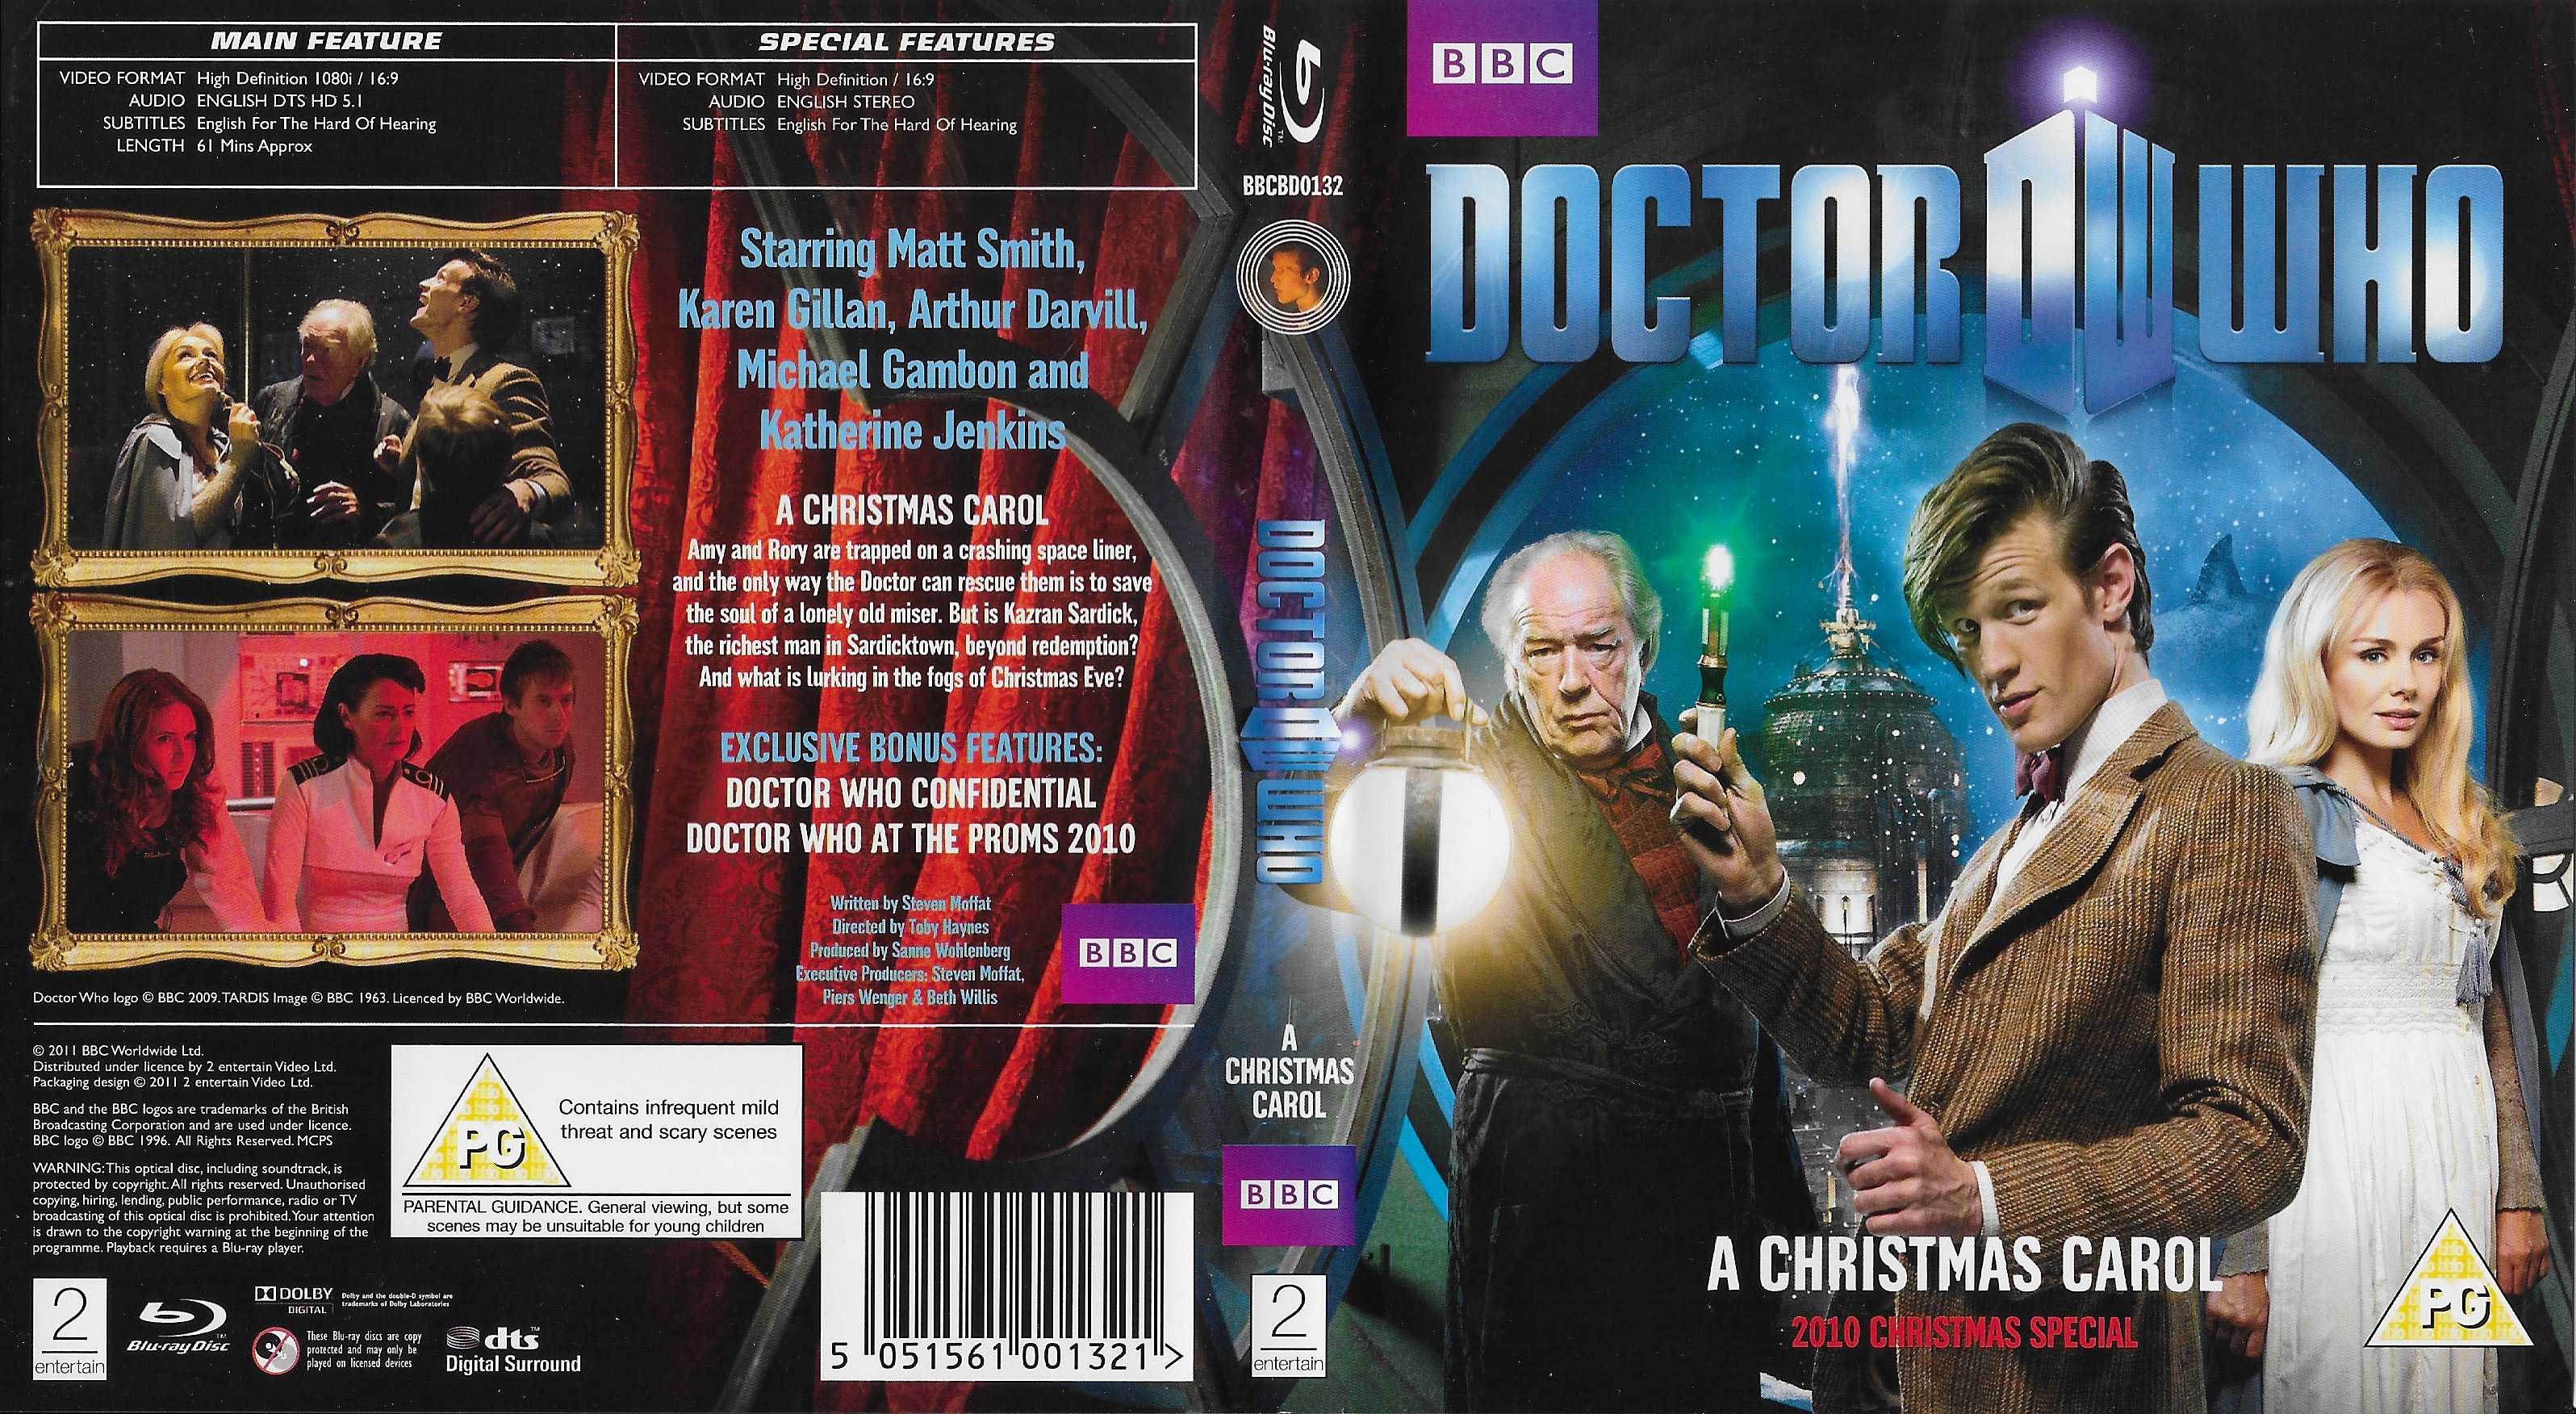 Picture of BBCBD 0132 Doctor Who - A Christmas carol by artist Steven Moffat from the BBC records and Tapes library